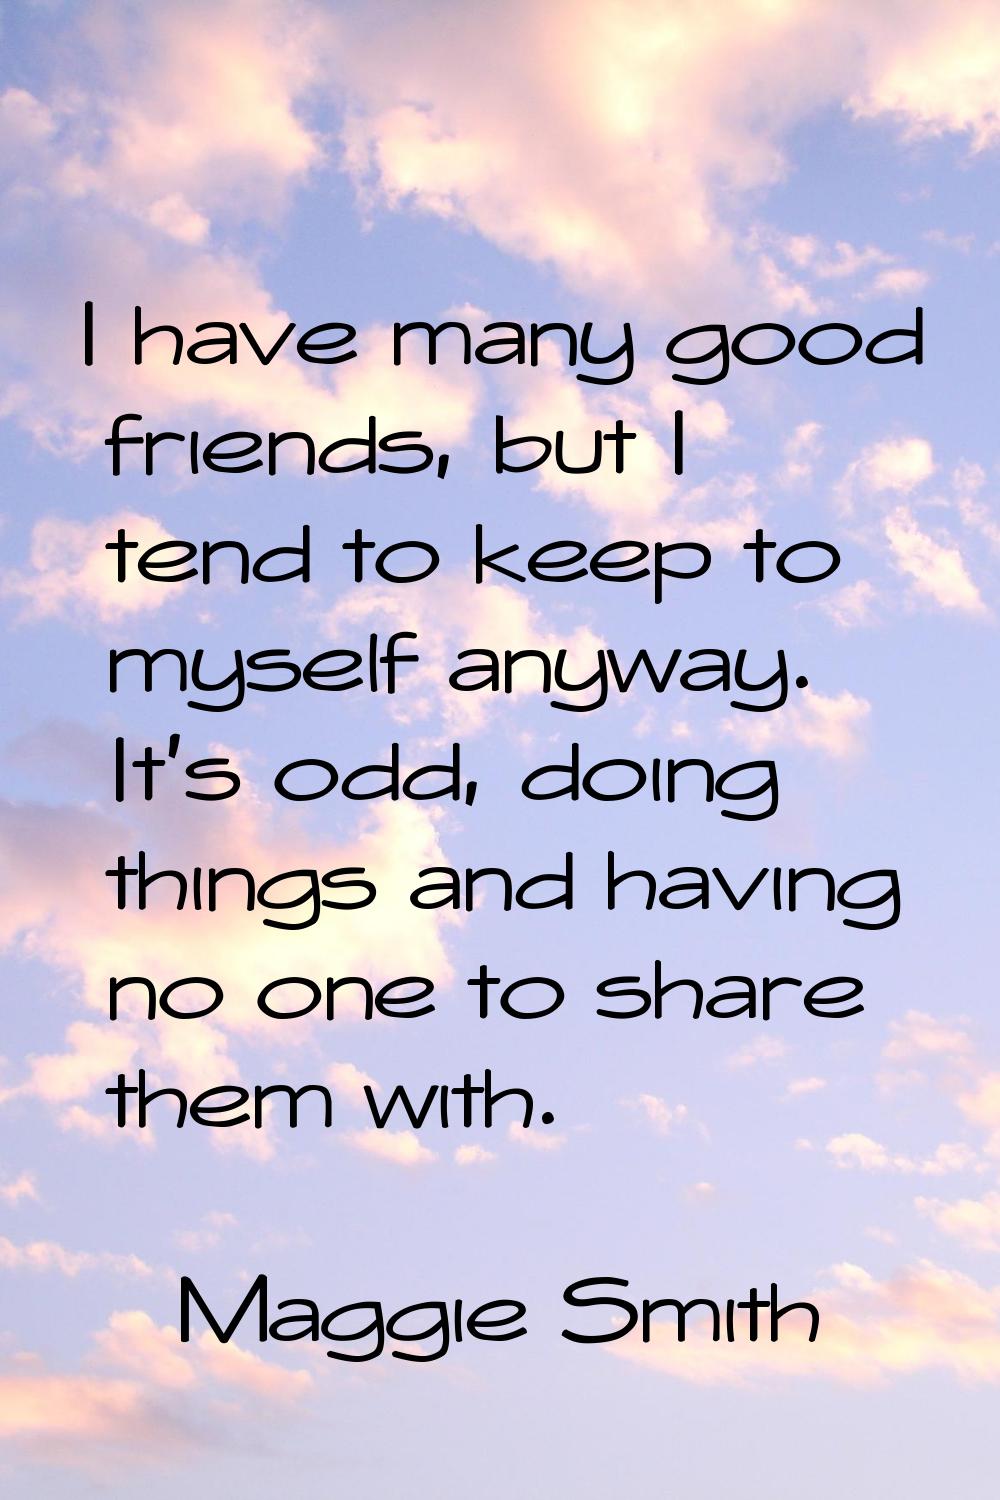 I have many good friends, but I tend to keep to myself anyway. It's odd, doing things and having no